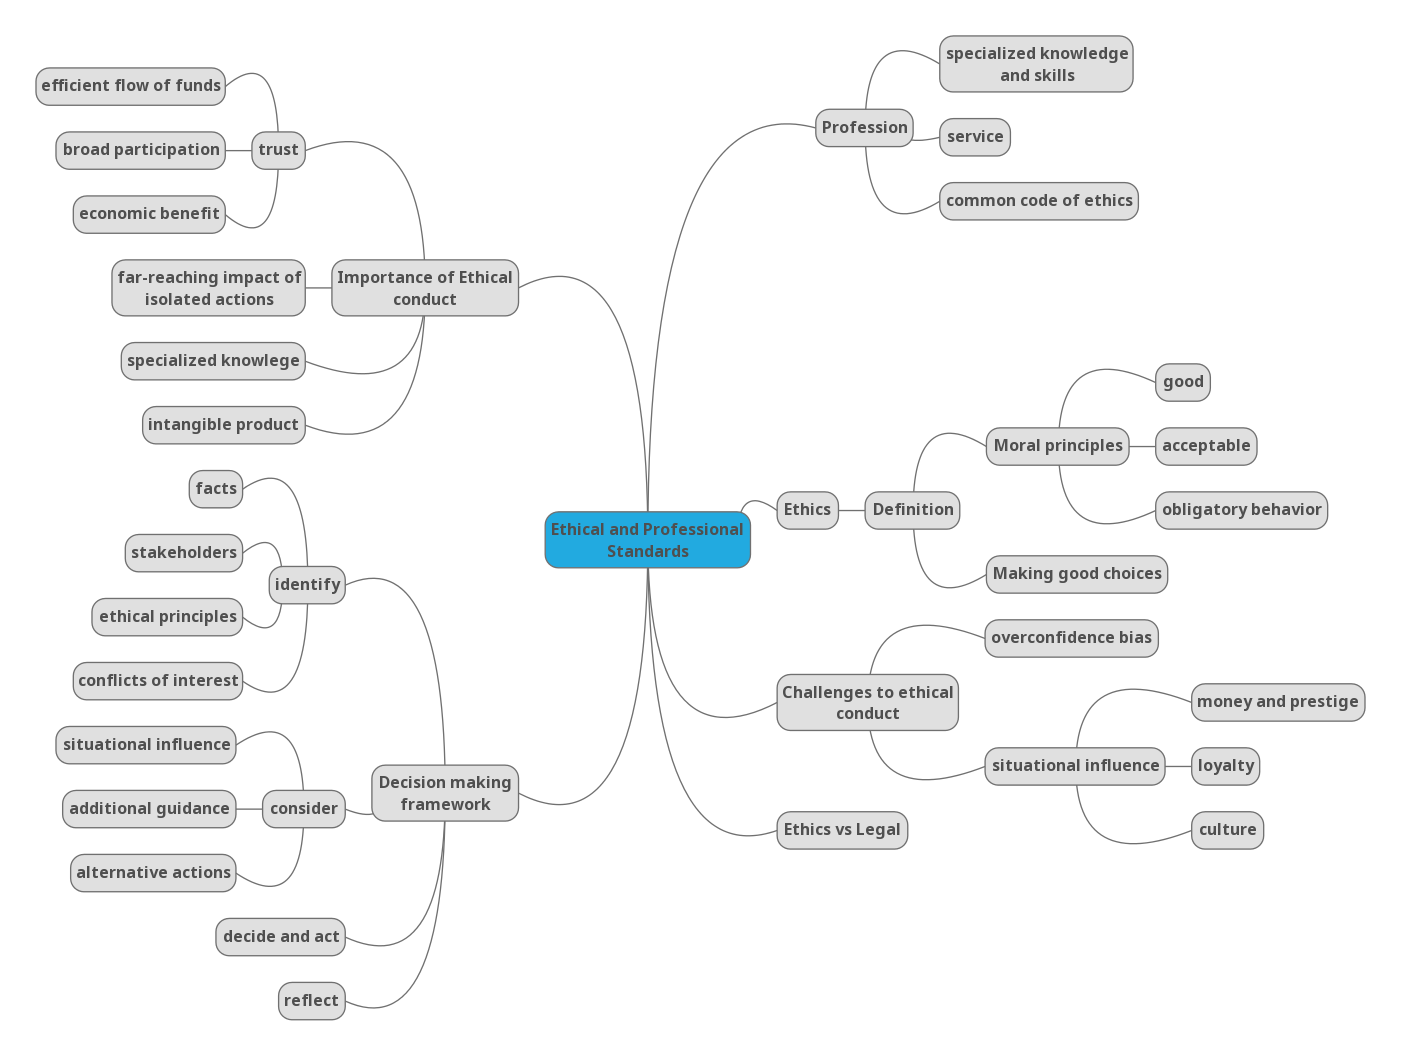 cfa-exam-part-i-ethical-and-professional-standards-free-study-mind-map-1-million-free-pictures